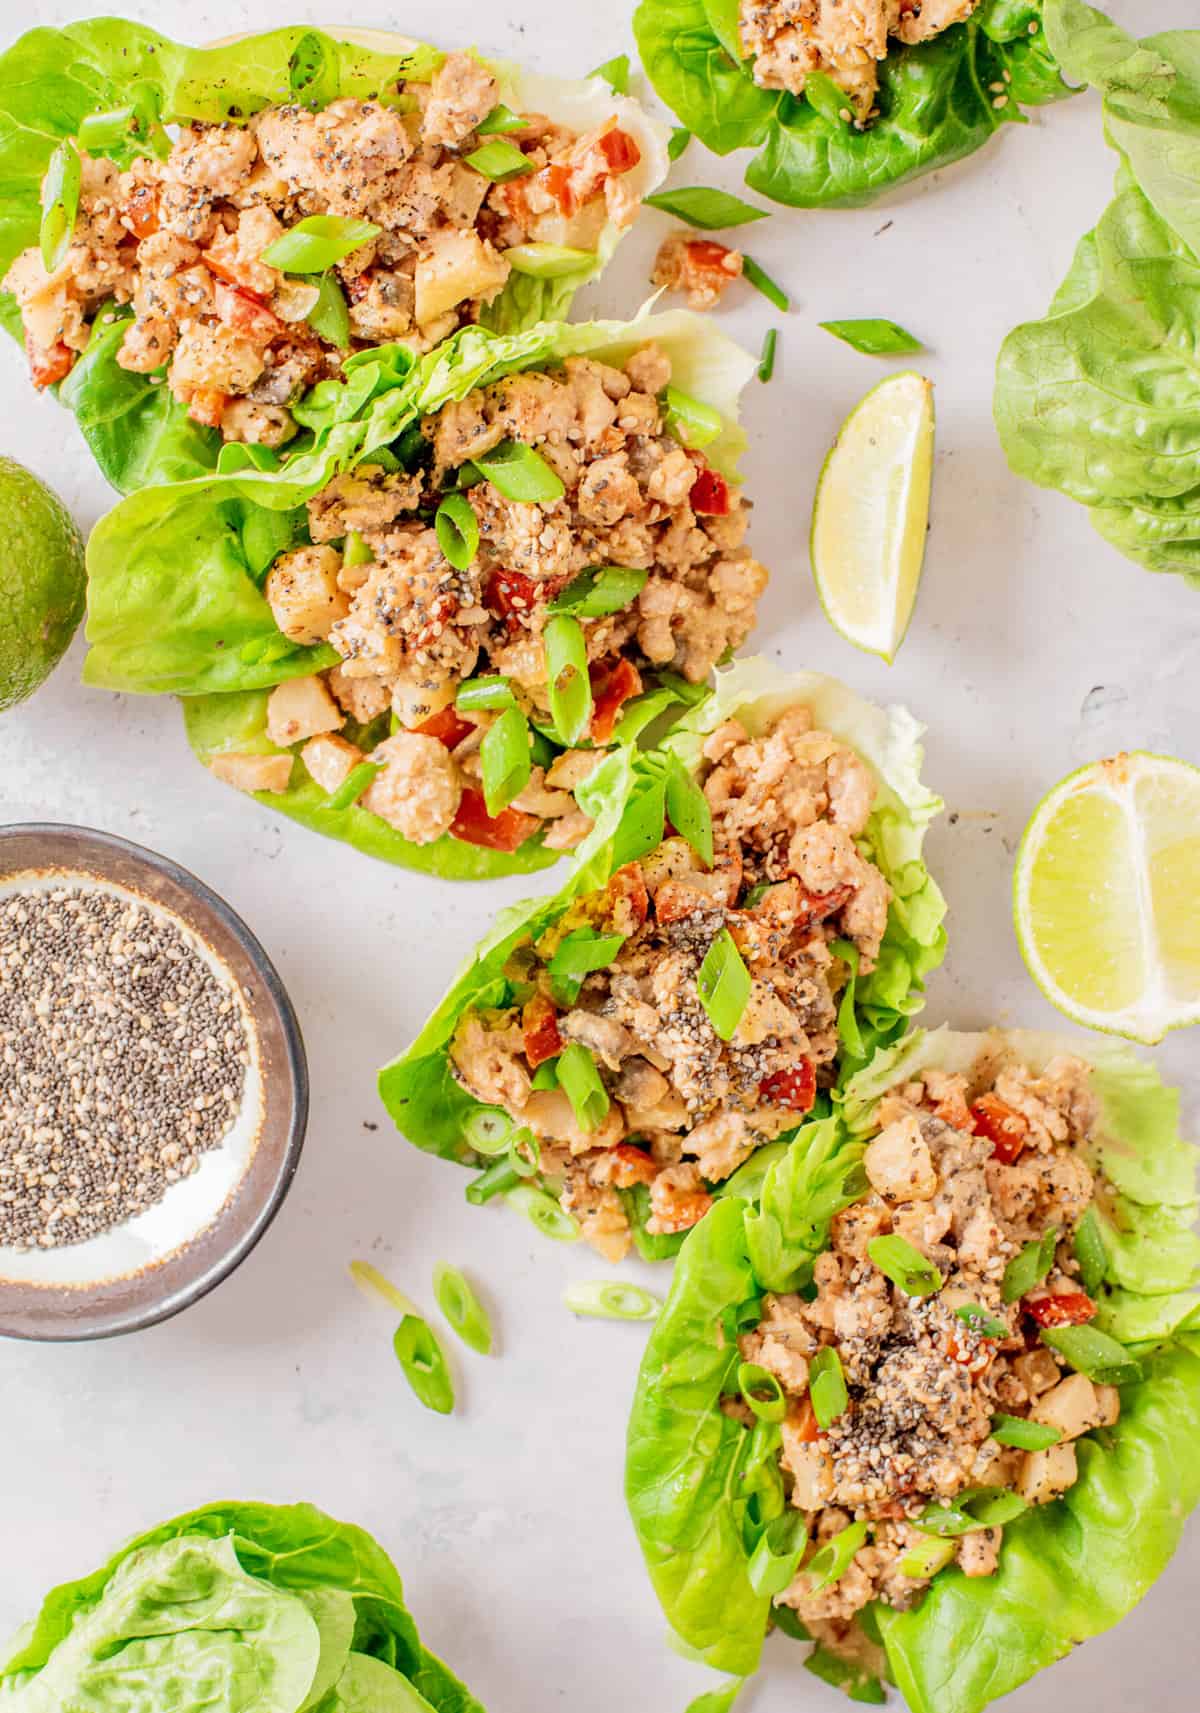 Several chicken lettuce wraps are placed on a white surface.